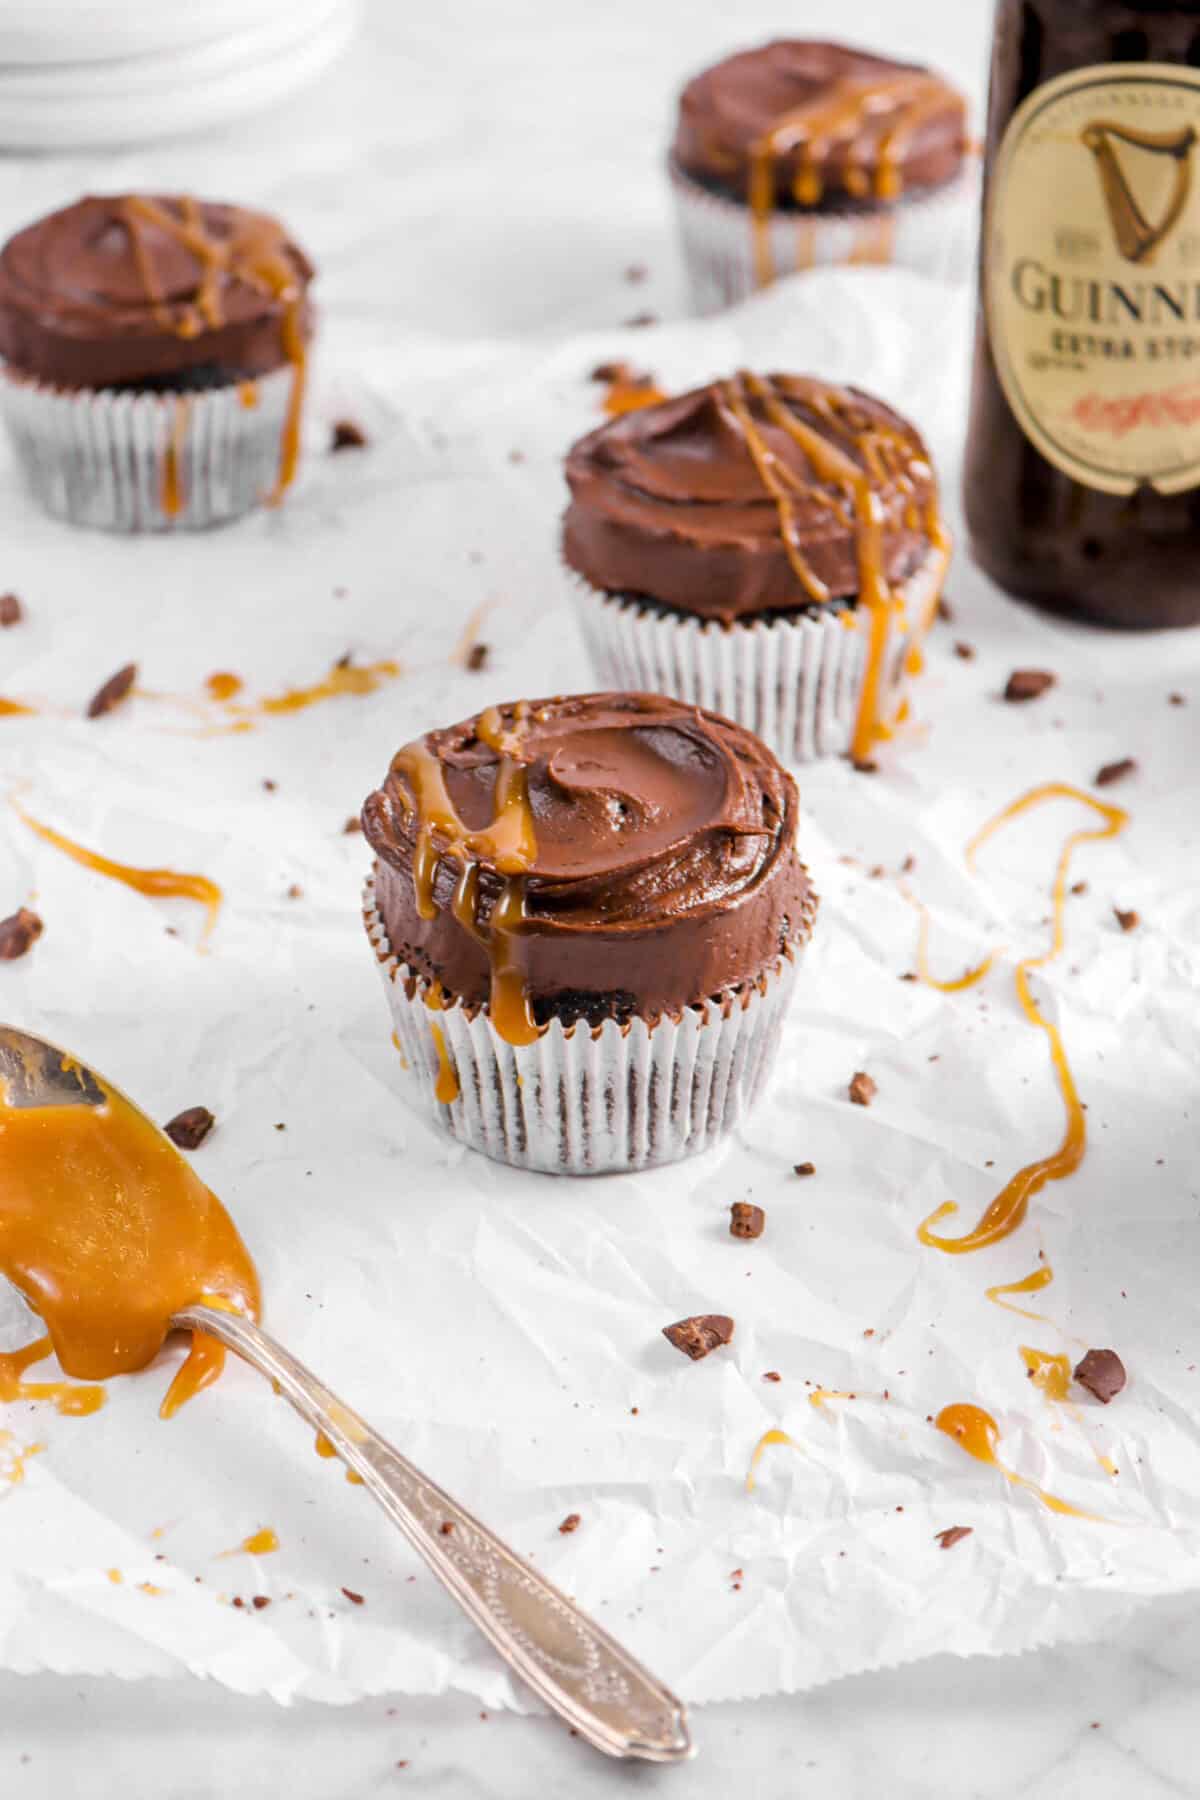 chocolate cupcake with caramel sauce drizzled on top with bottle of guinness behind, three cupcakes, and spoon of caramel